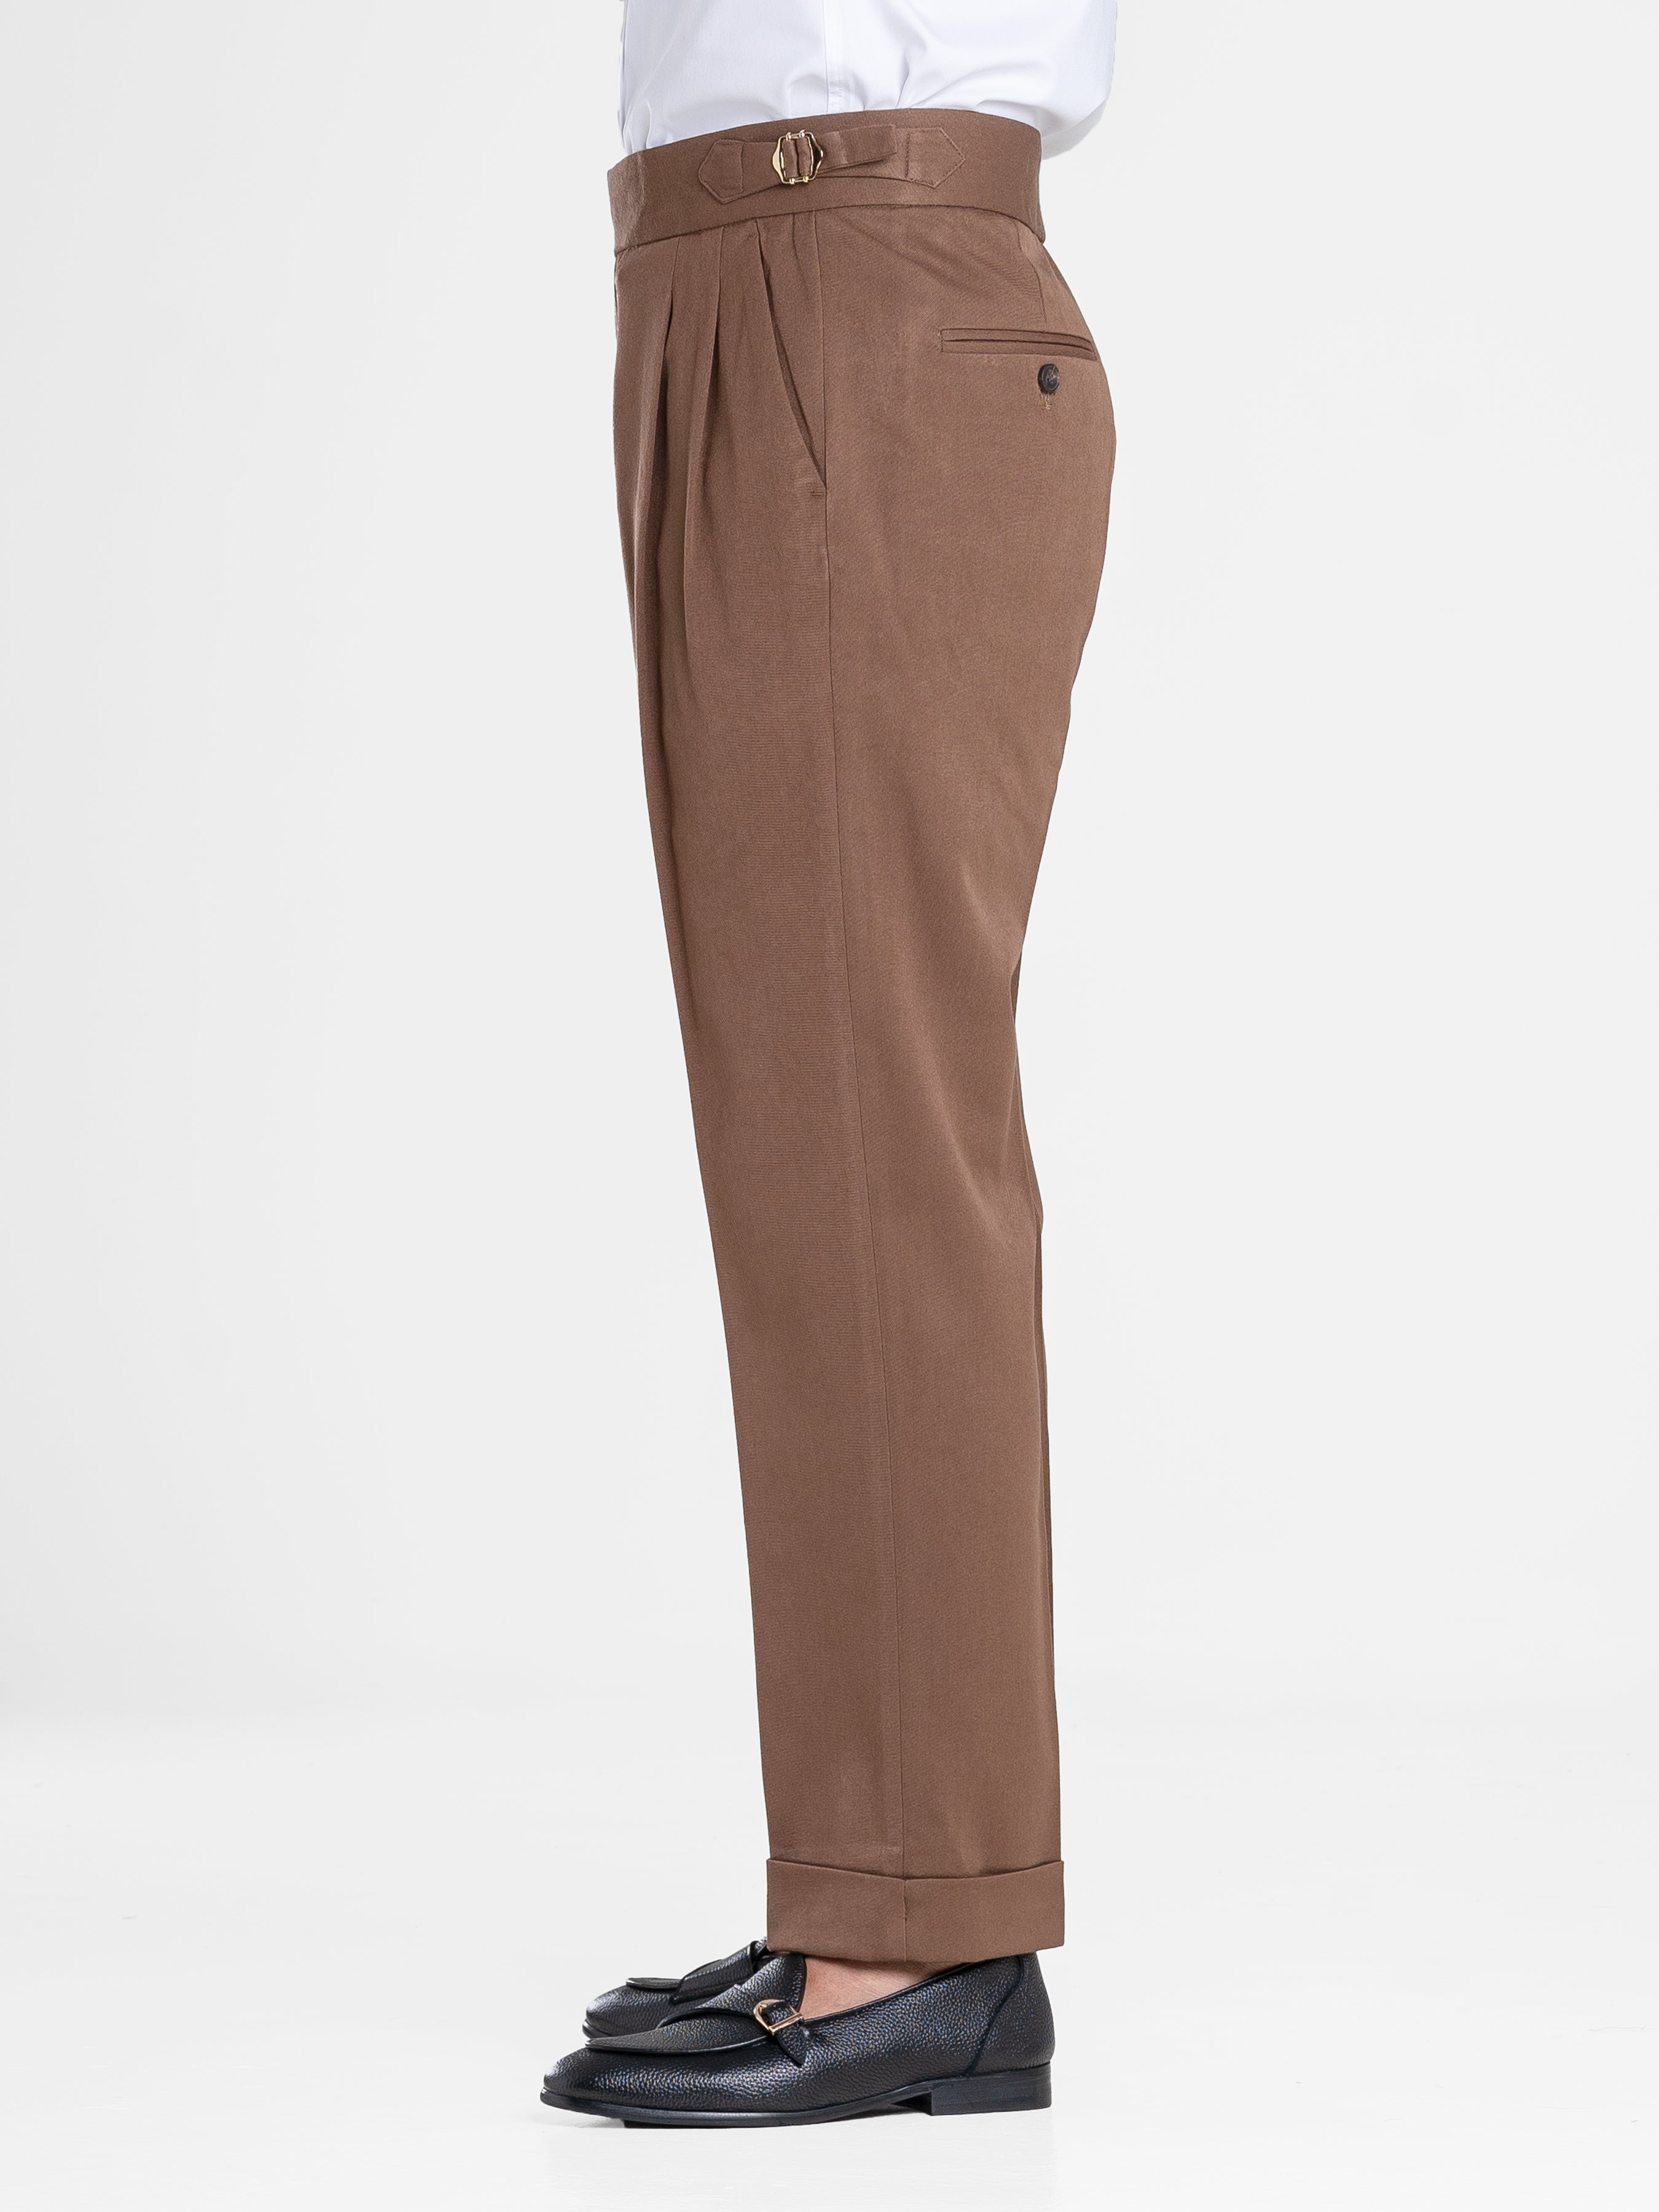 Trousers With Side Adjusters - Brown Plain Cuffed (Stretchable)